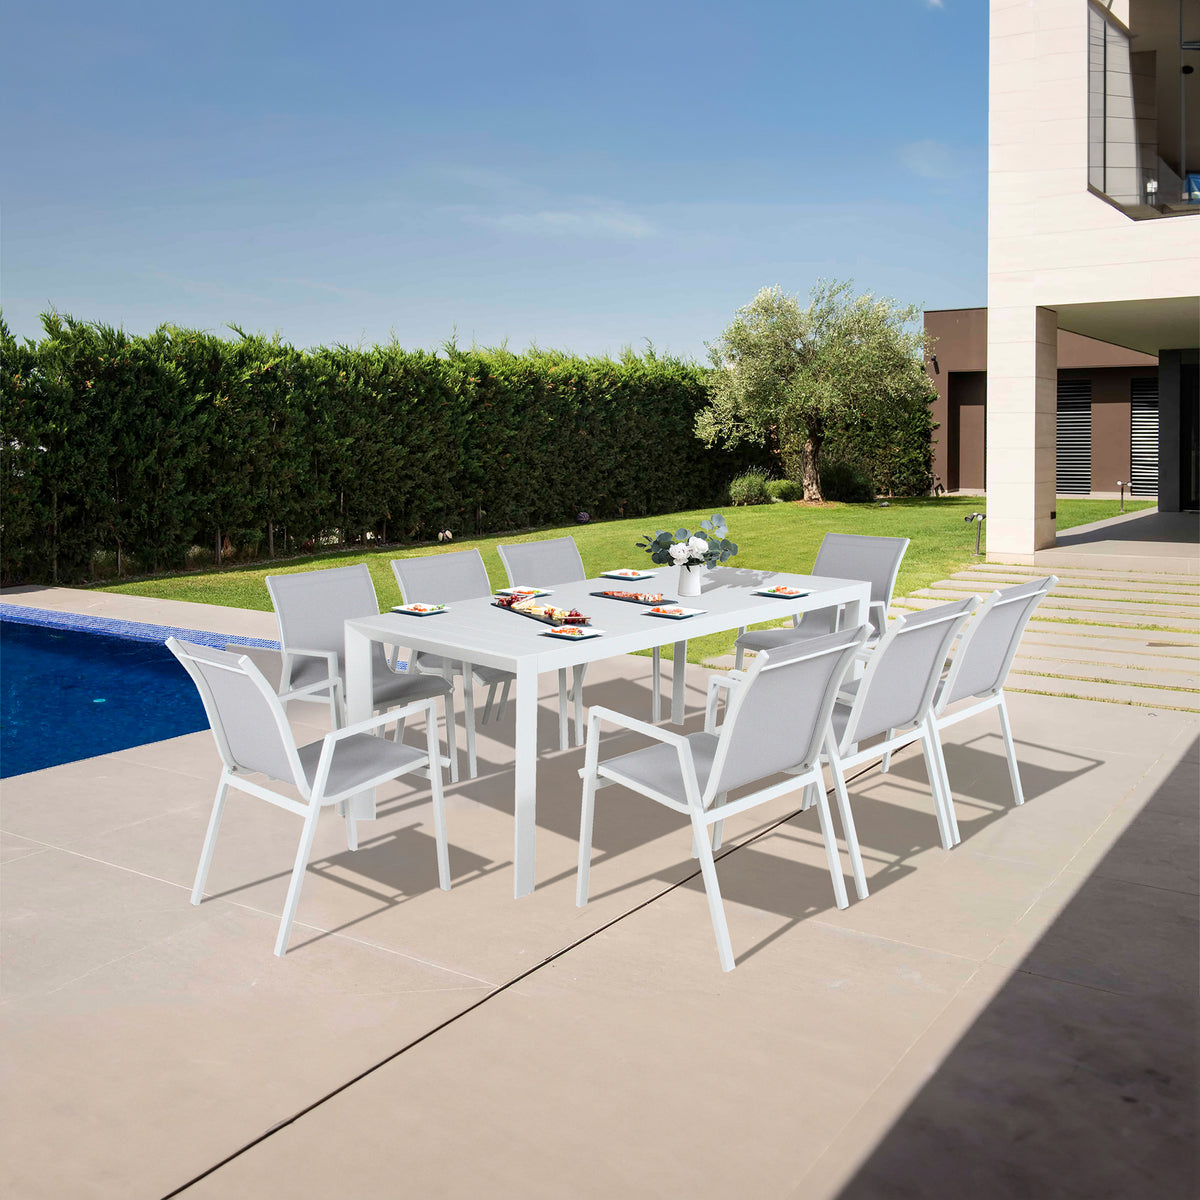 Iberia 178cm Outdoor Dining Table White 